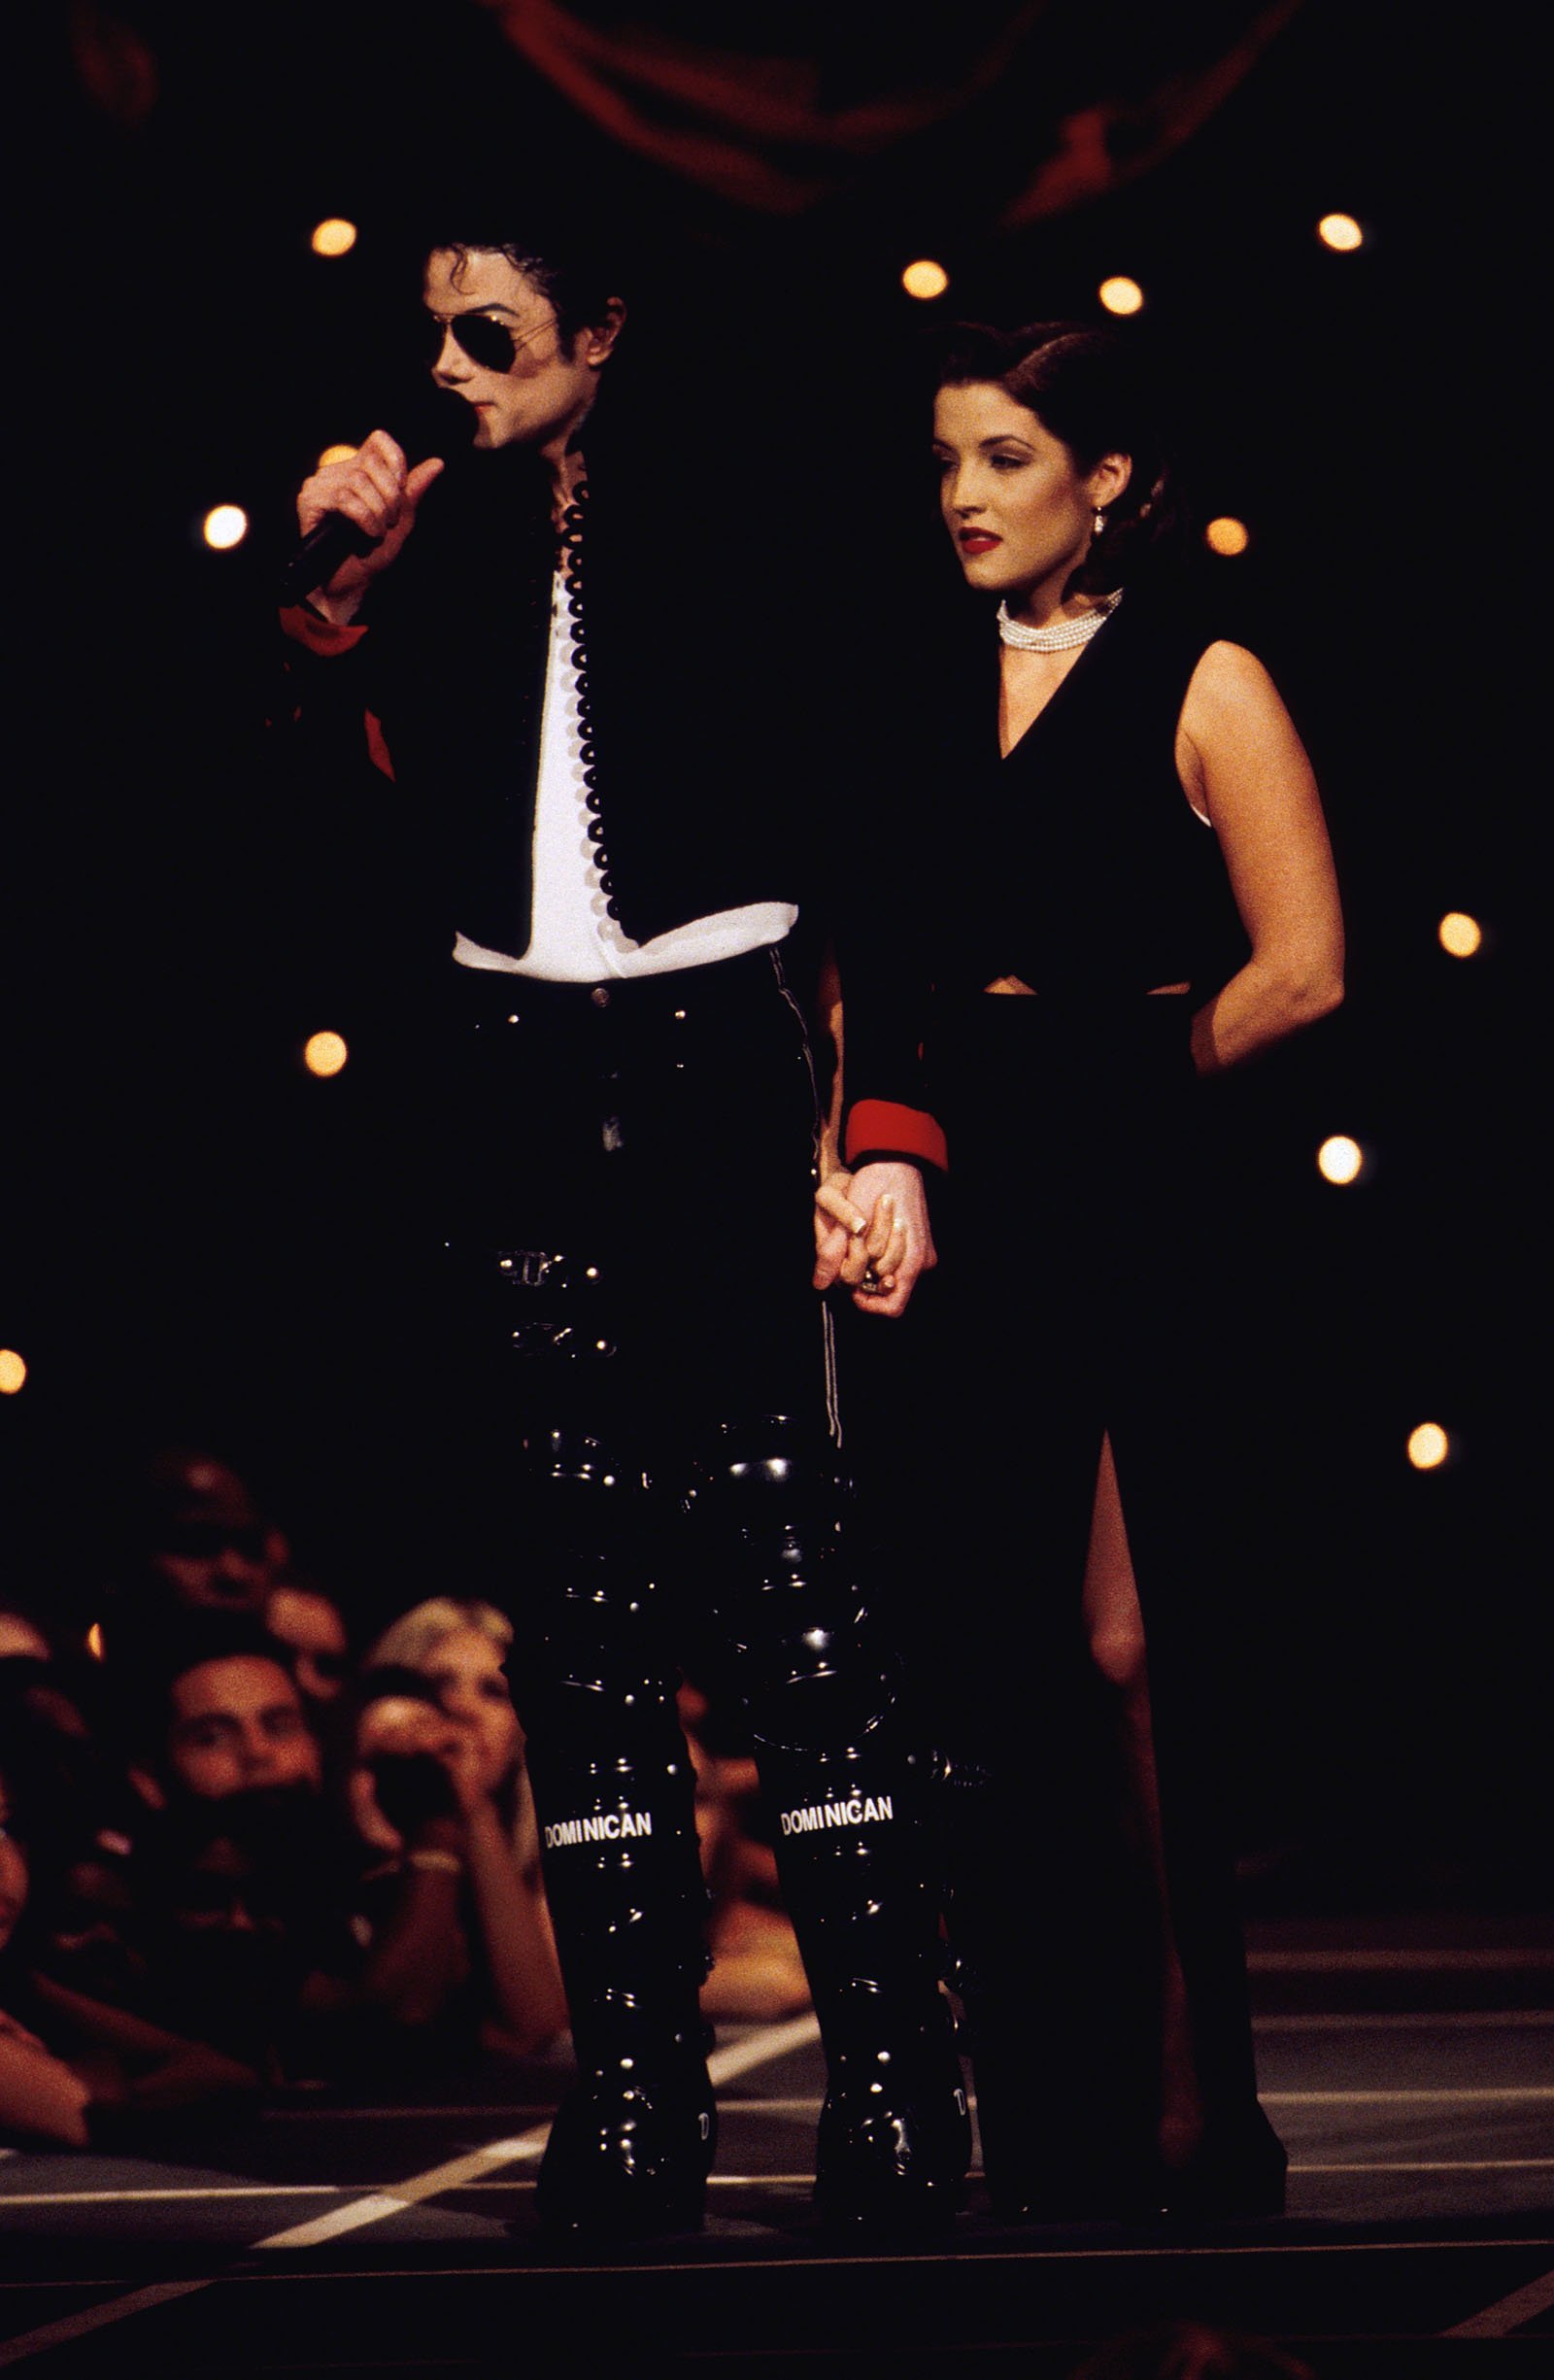 Michael Jackson and Lisa Marie Presley. I Image: Getty Images.